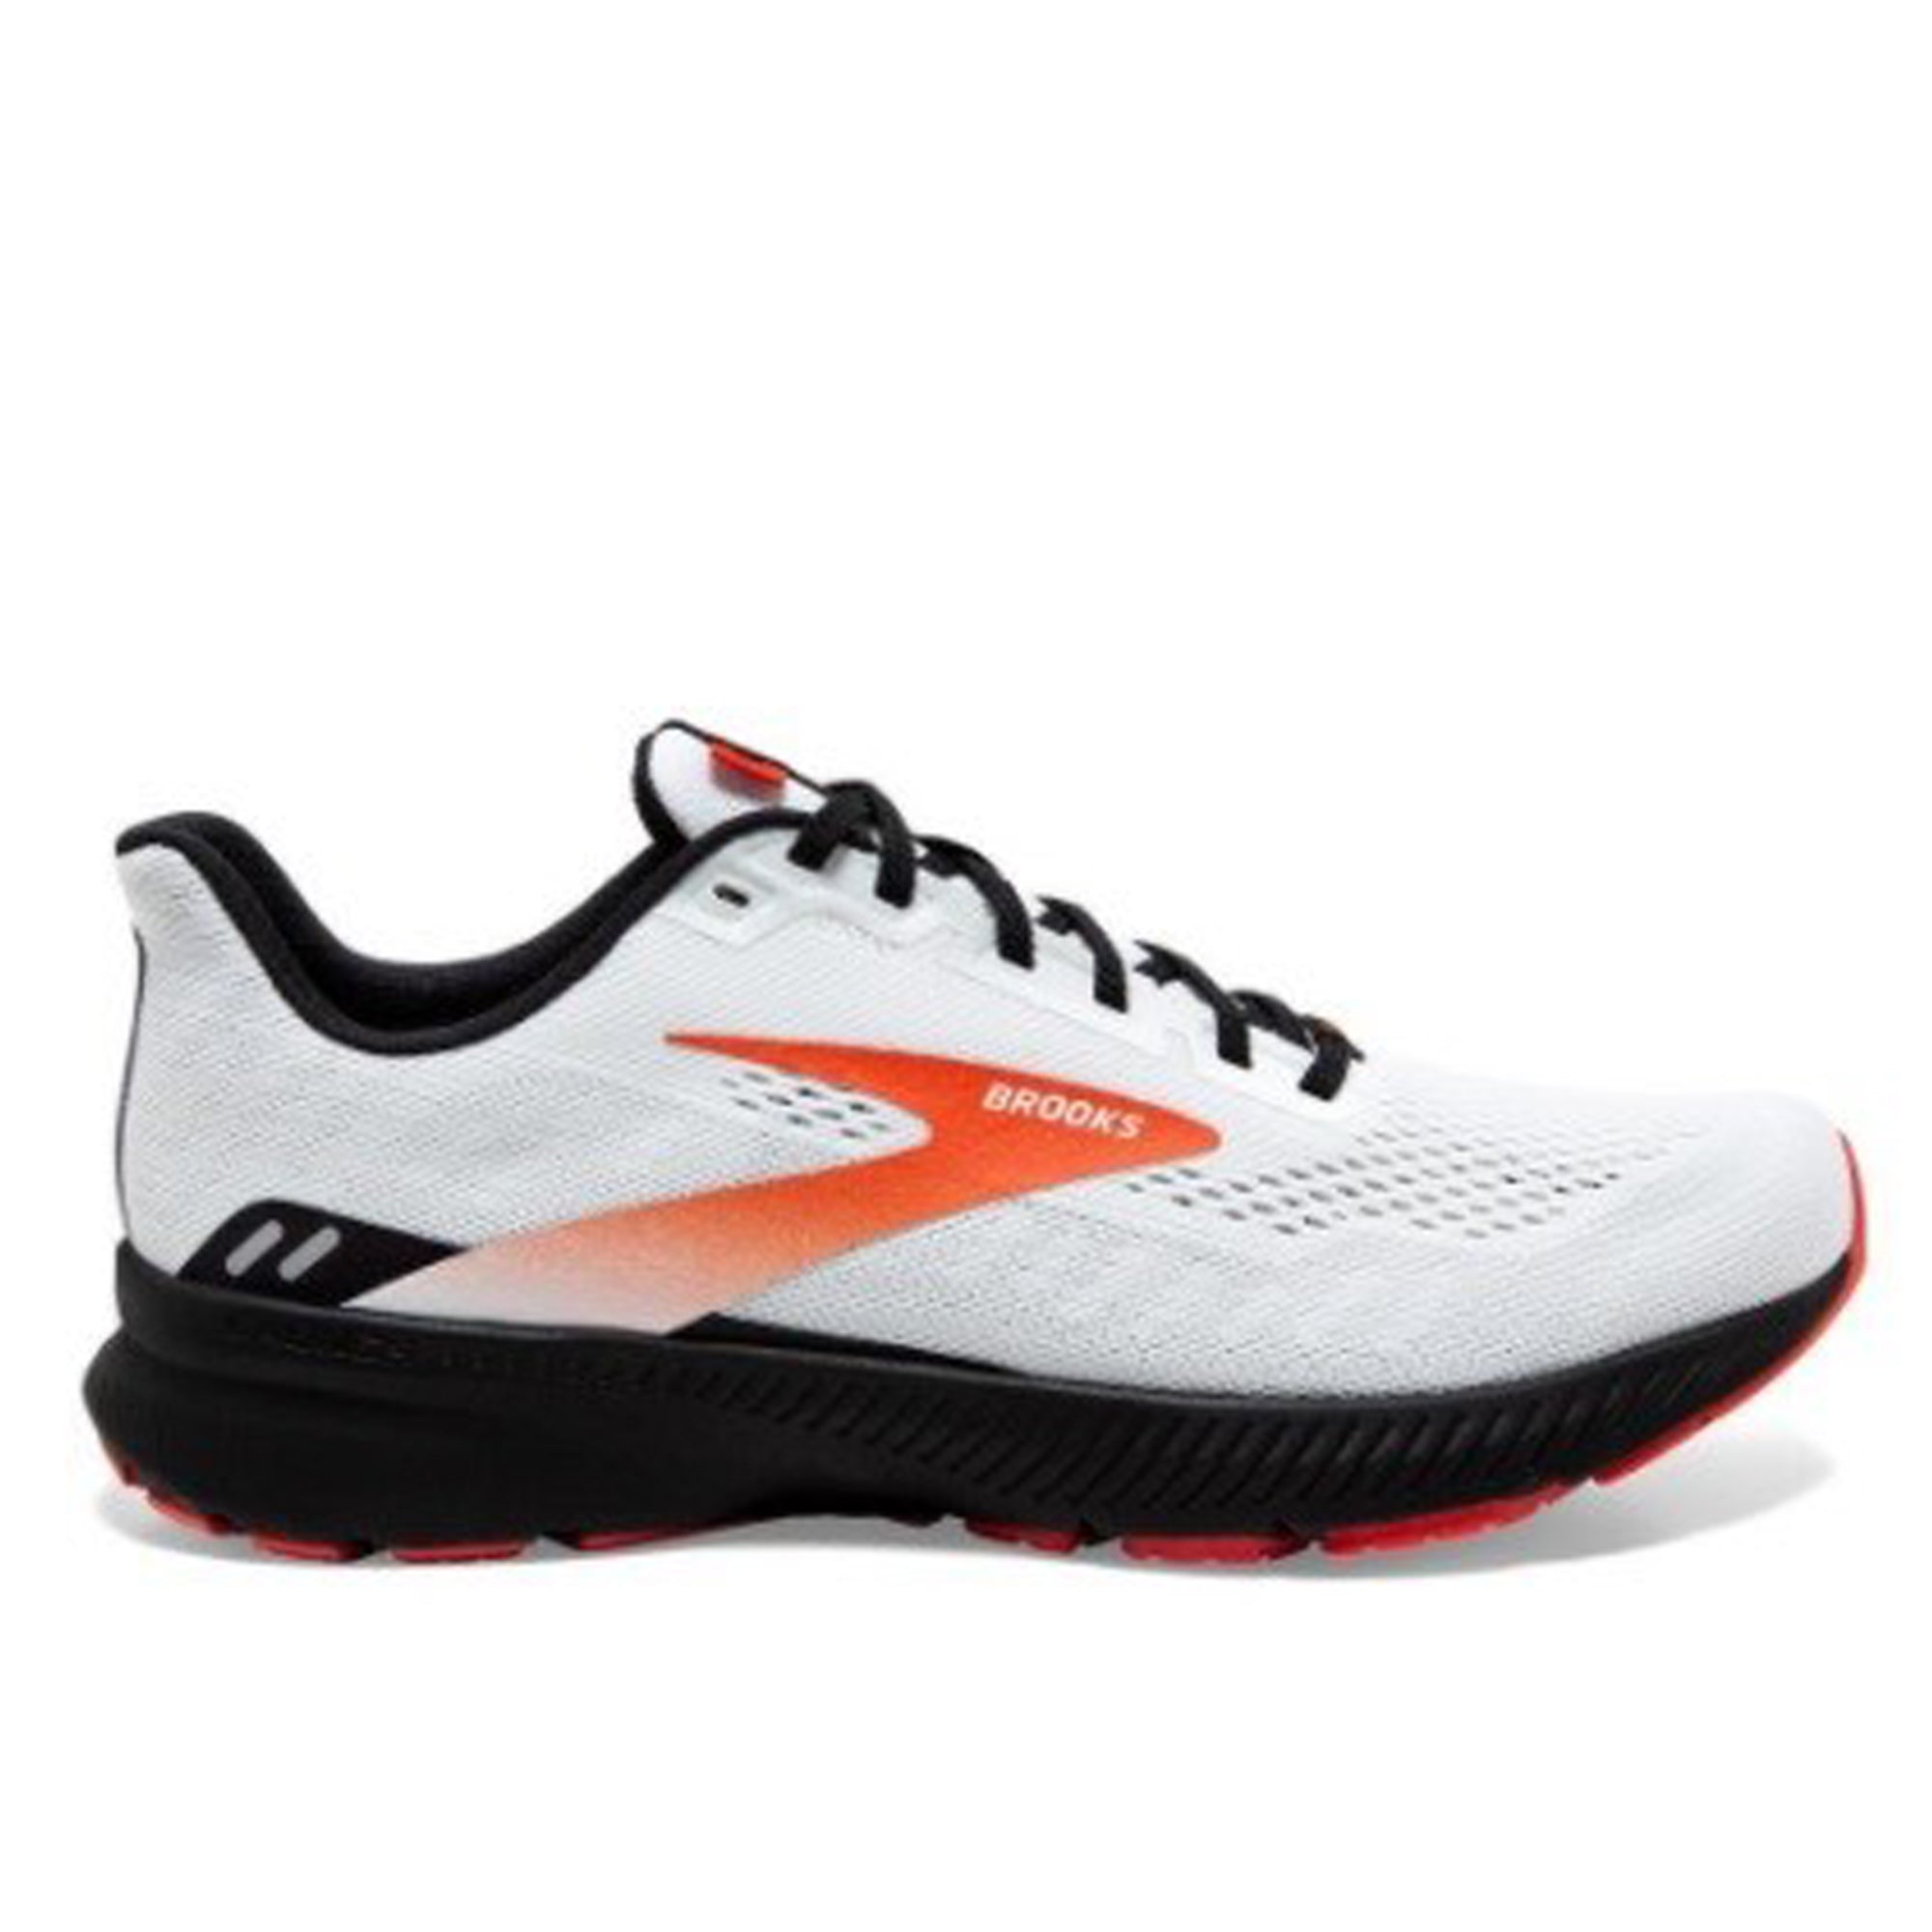 BROOKS LAUNCH 8 - HOMME